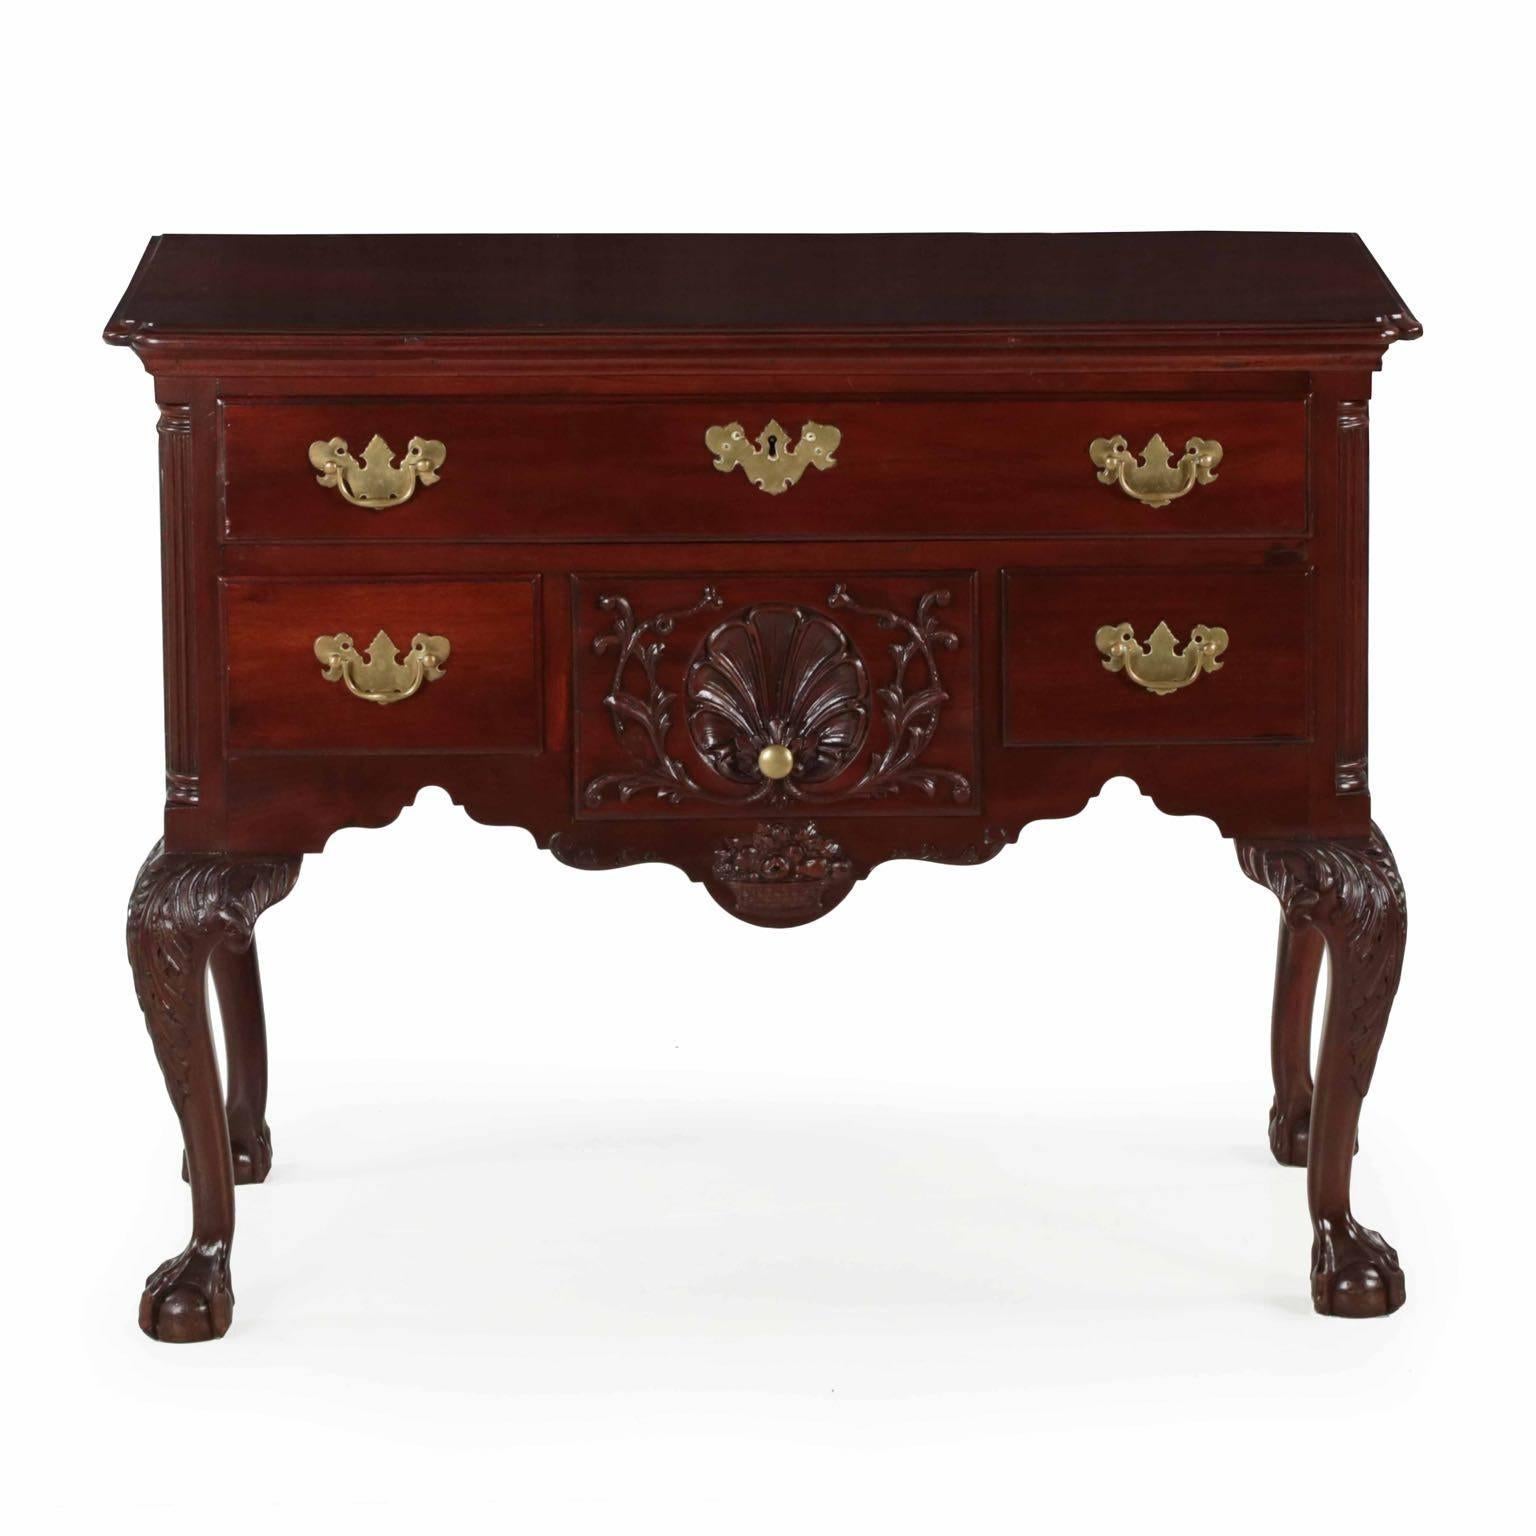 An attractive benchmade lowboy in the Chippendale style after the originals of Philadelphia, this example is probably crafted at the turn of the century. A nice dense Cuban mahogany is utilized throughout all of the primary surfaces, the secondaries